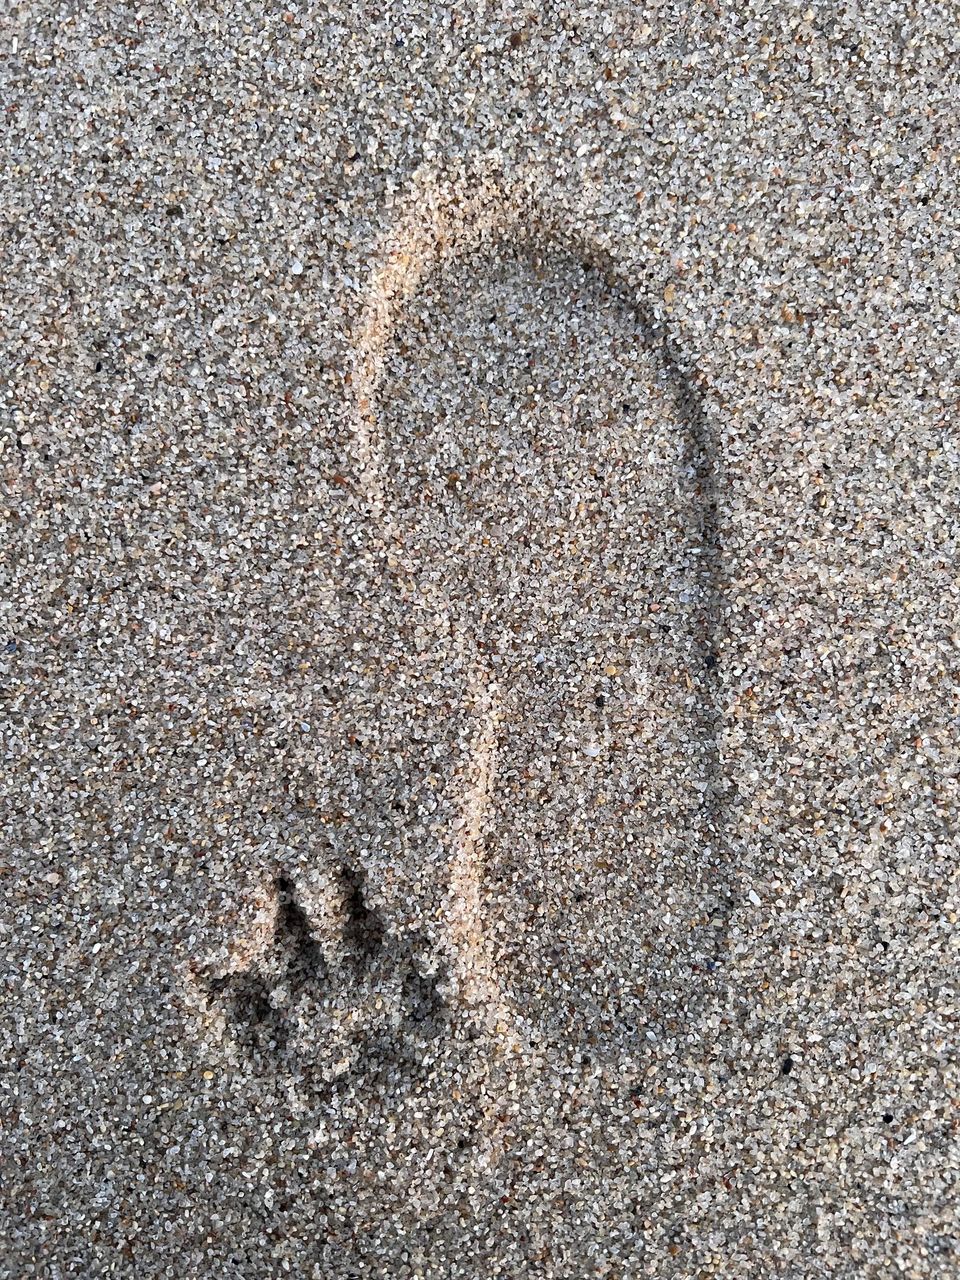 Footprint of pet and owner